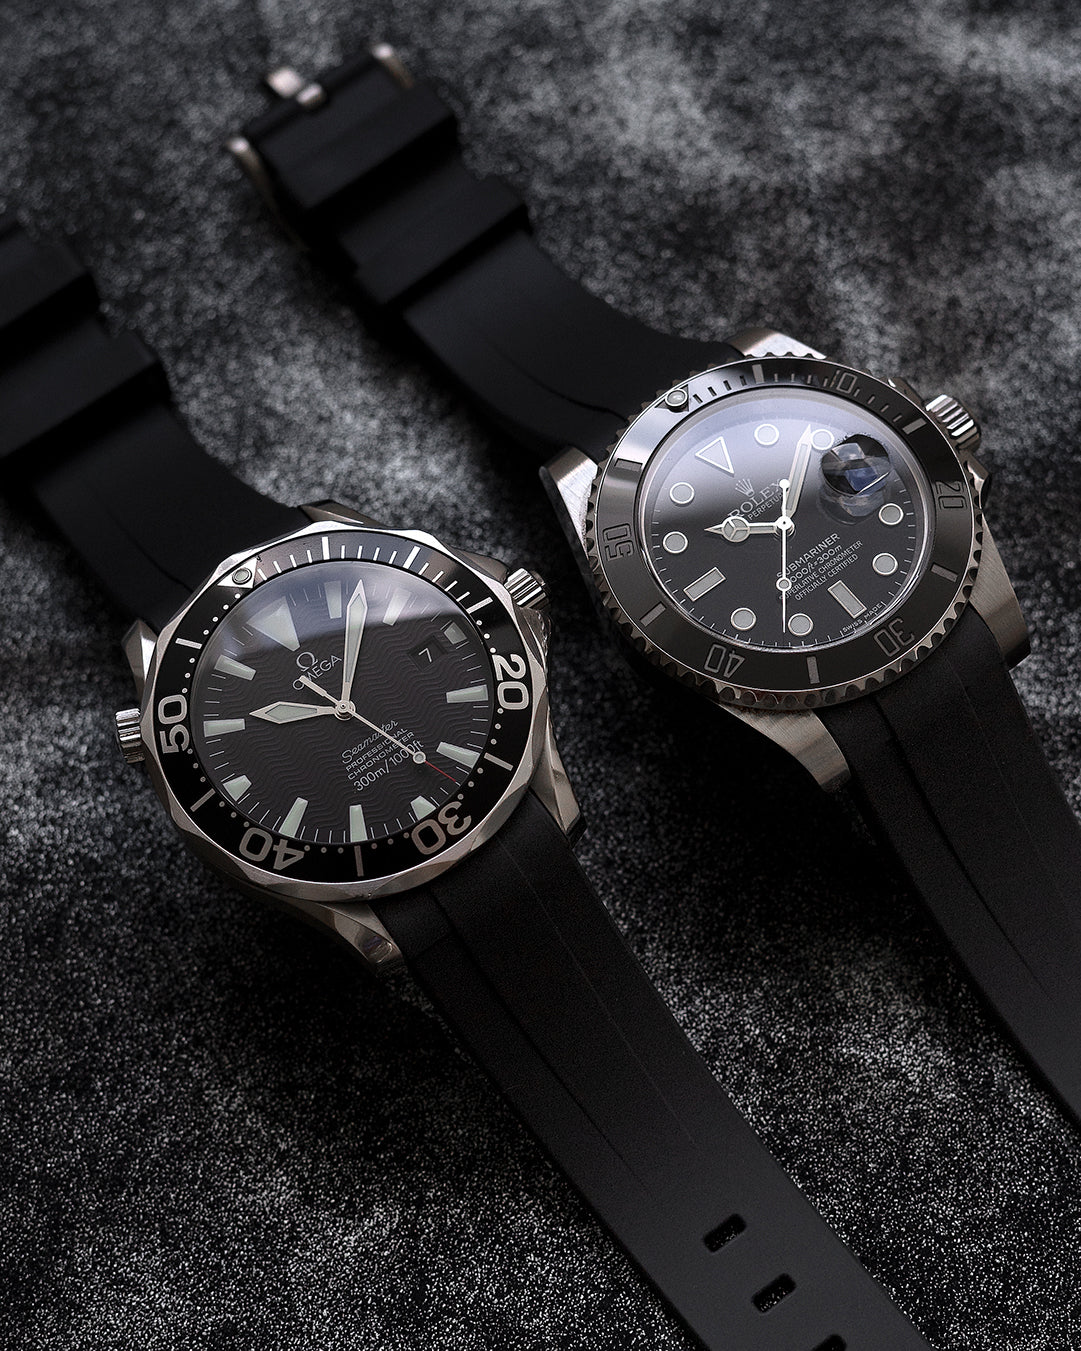 Best rubber straps for the Rolex Submariner on the market